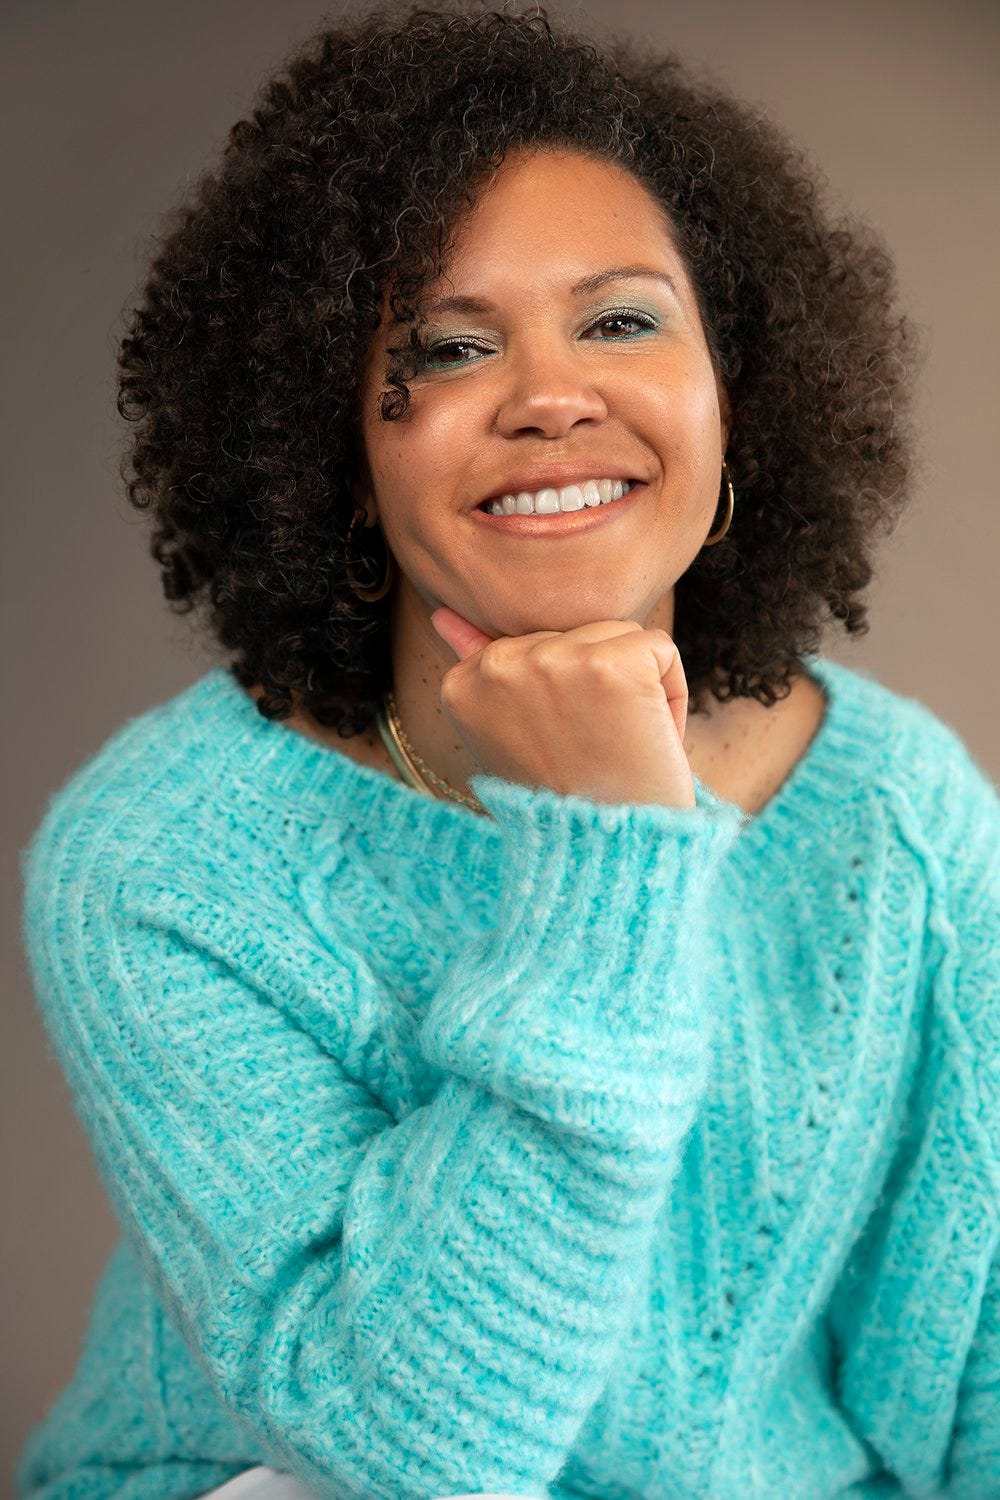 Headshot of today's guest, Jessica Wilson, wearing a light blue, knitted jumper, against a brown backdrop